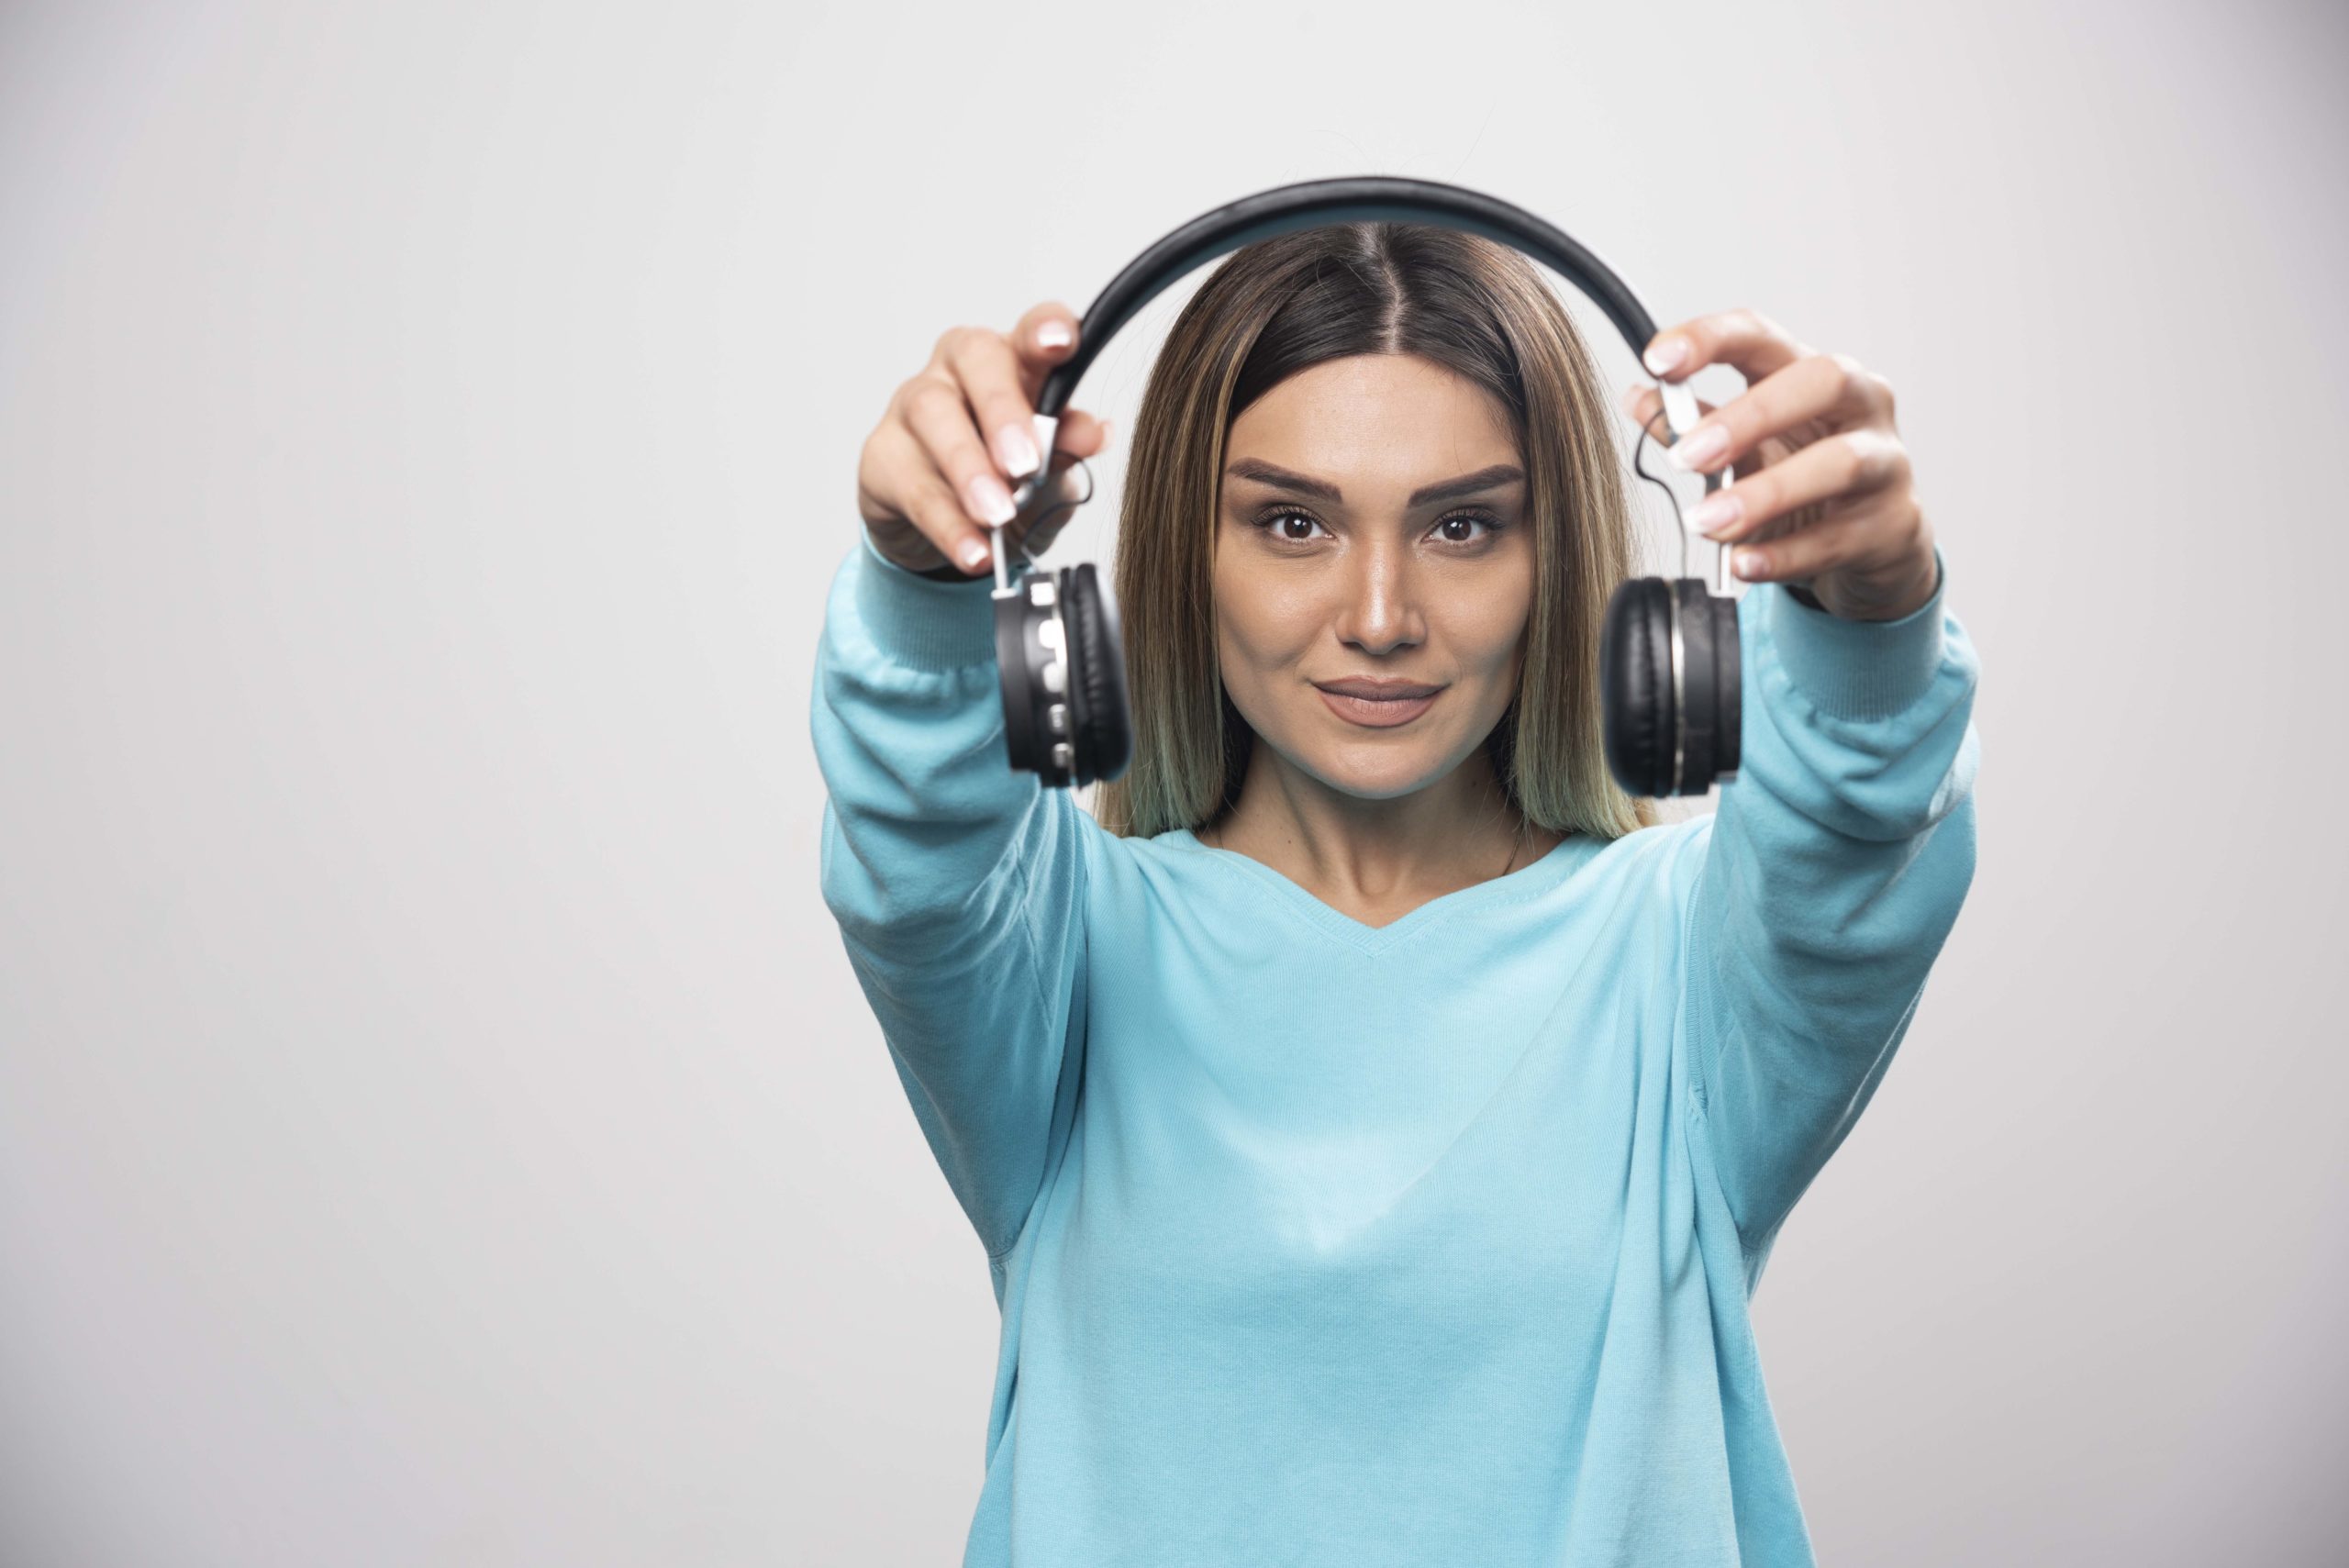 

HOW TO WEAR YOUR HEADPHONES HEALTHILY?